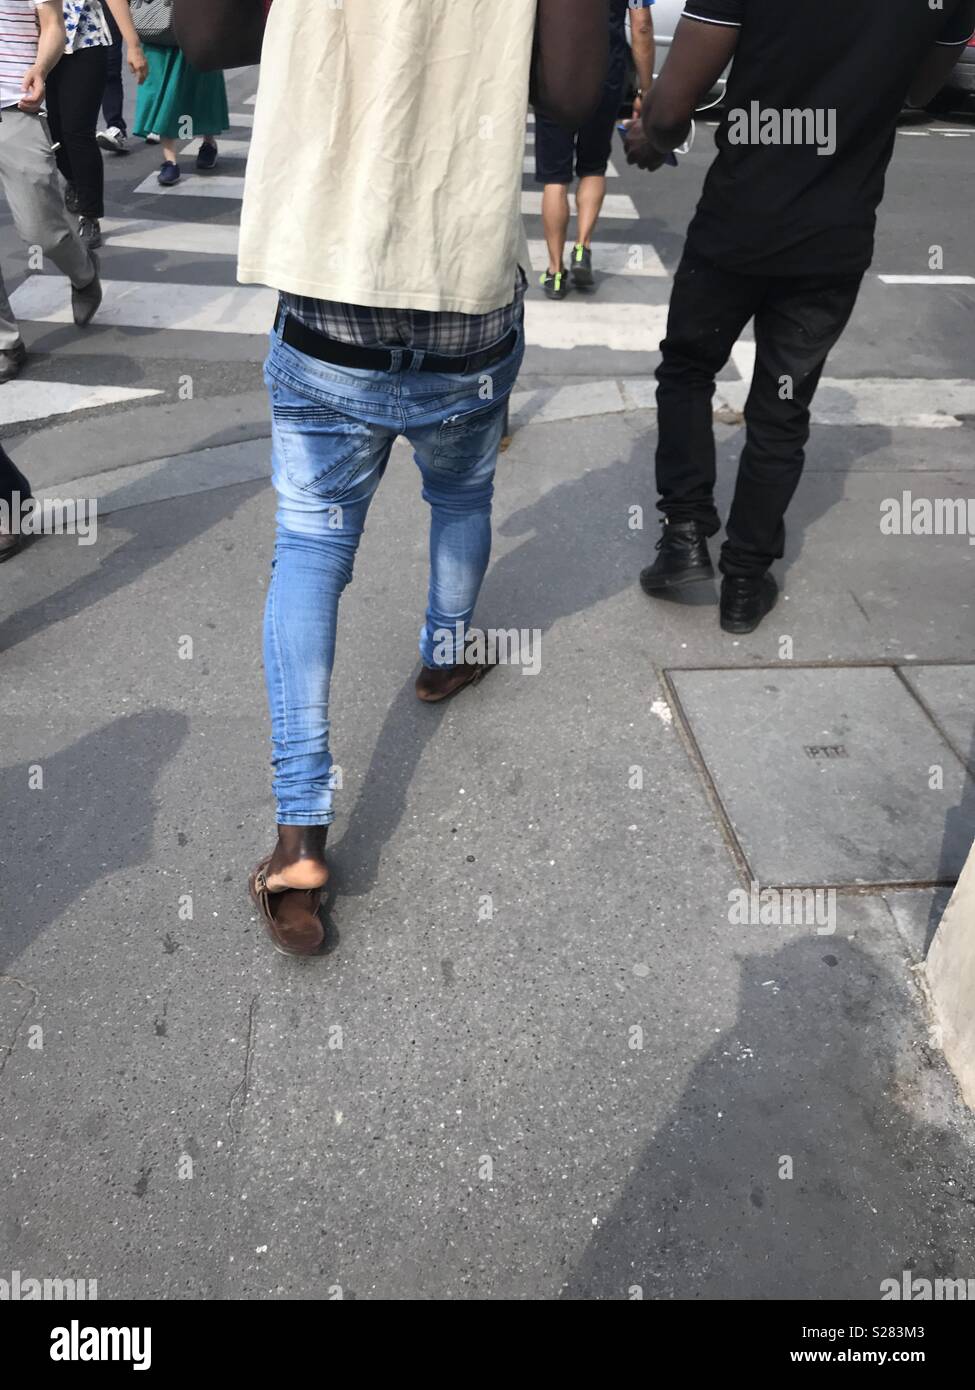 The almost falling jeans, worn by a man walking on streets of Paris, France  Stock Photo - Alamy